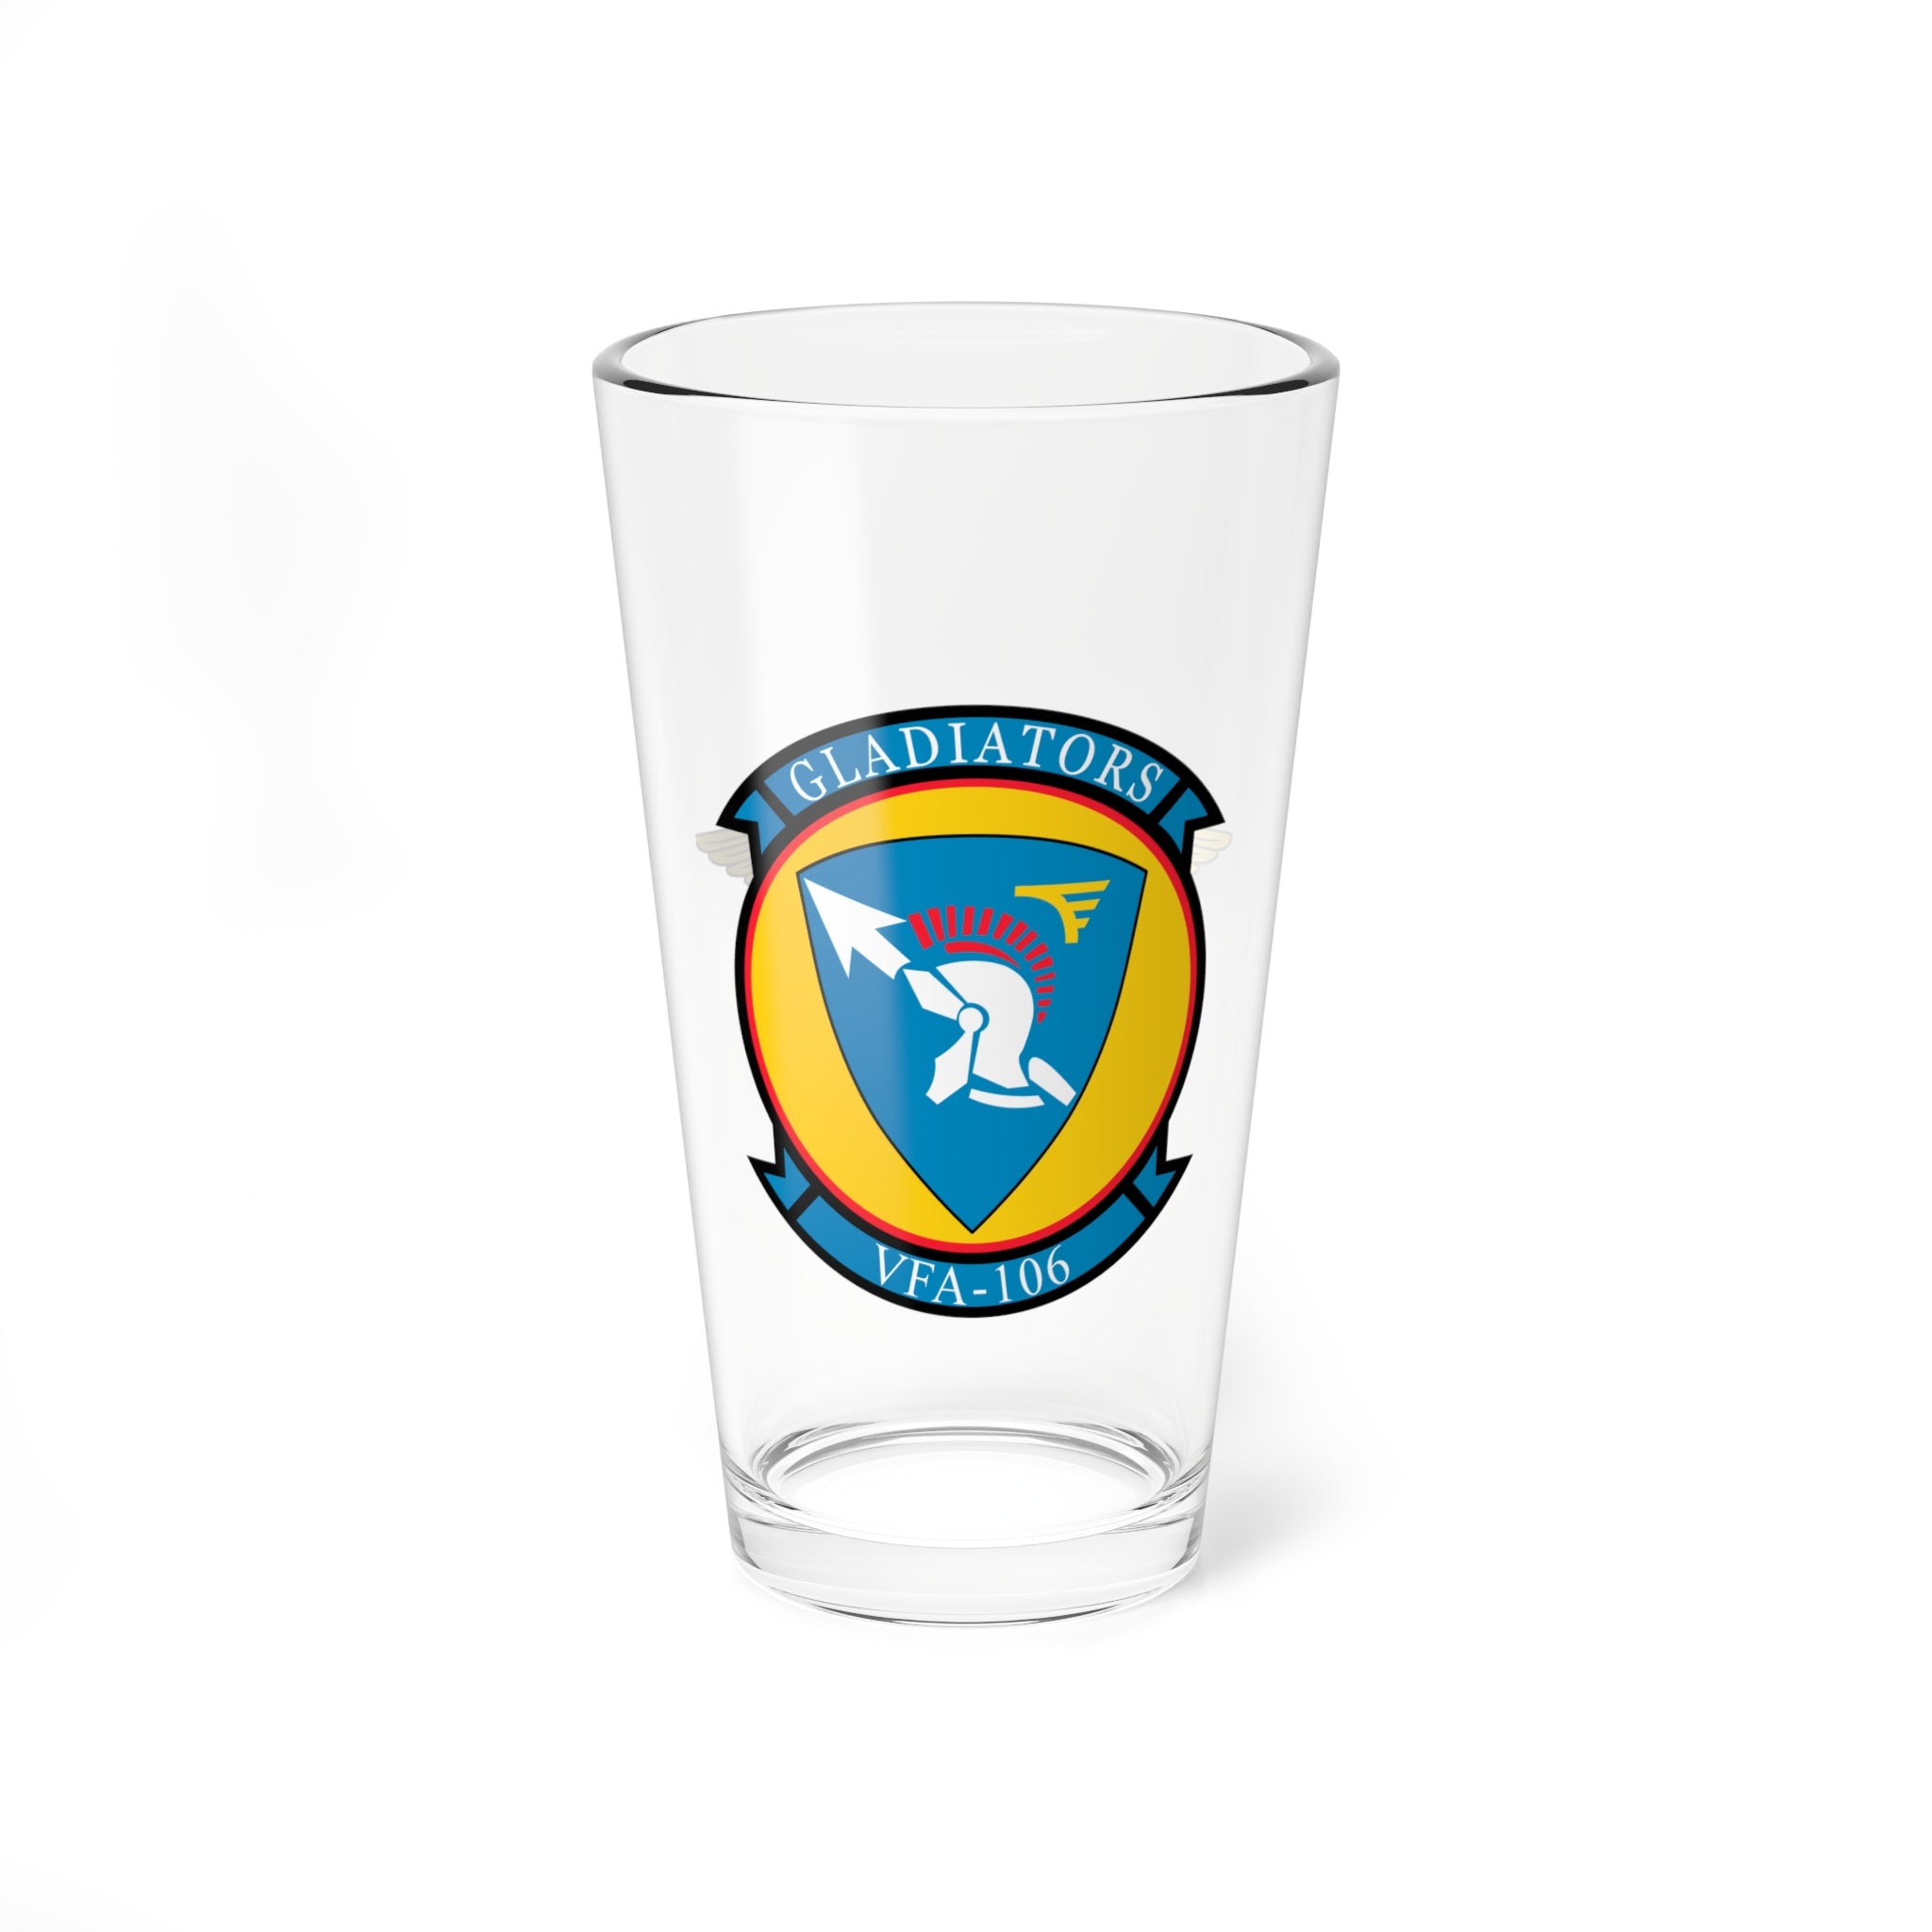 VFA-106 "Gladiators" NFO Pint Glass, Navy Strike Fighter Replacement Squacdron flying the F/A/-18E/F Super Hornet